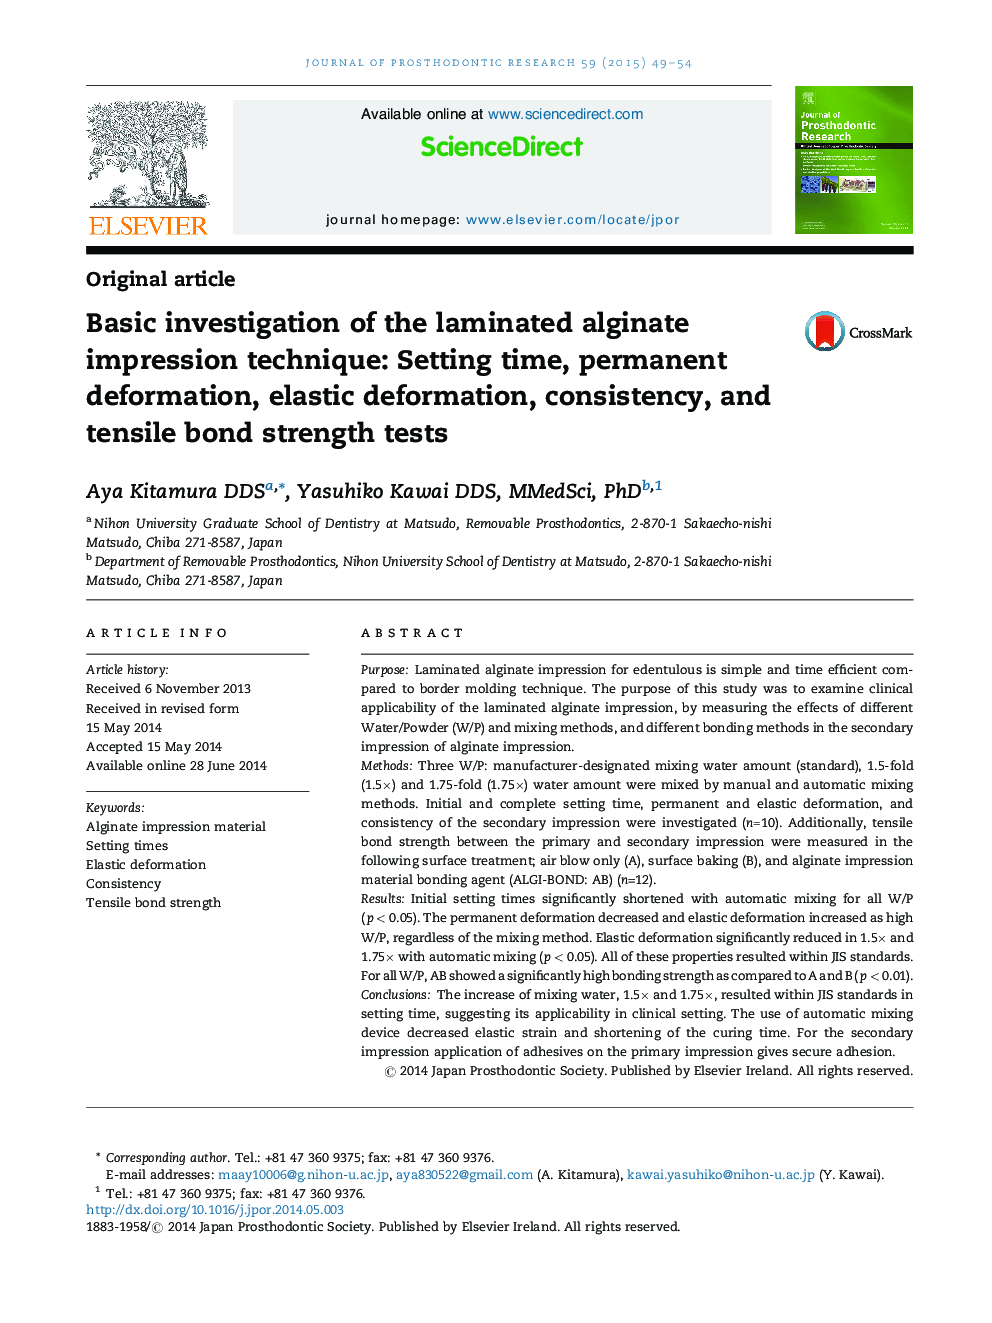 Basic investigation of the laminated alginate impression technique: Setting time, permanent deformation, elastic deformation, consistency, and tensile bond strength tests